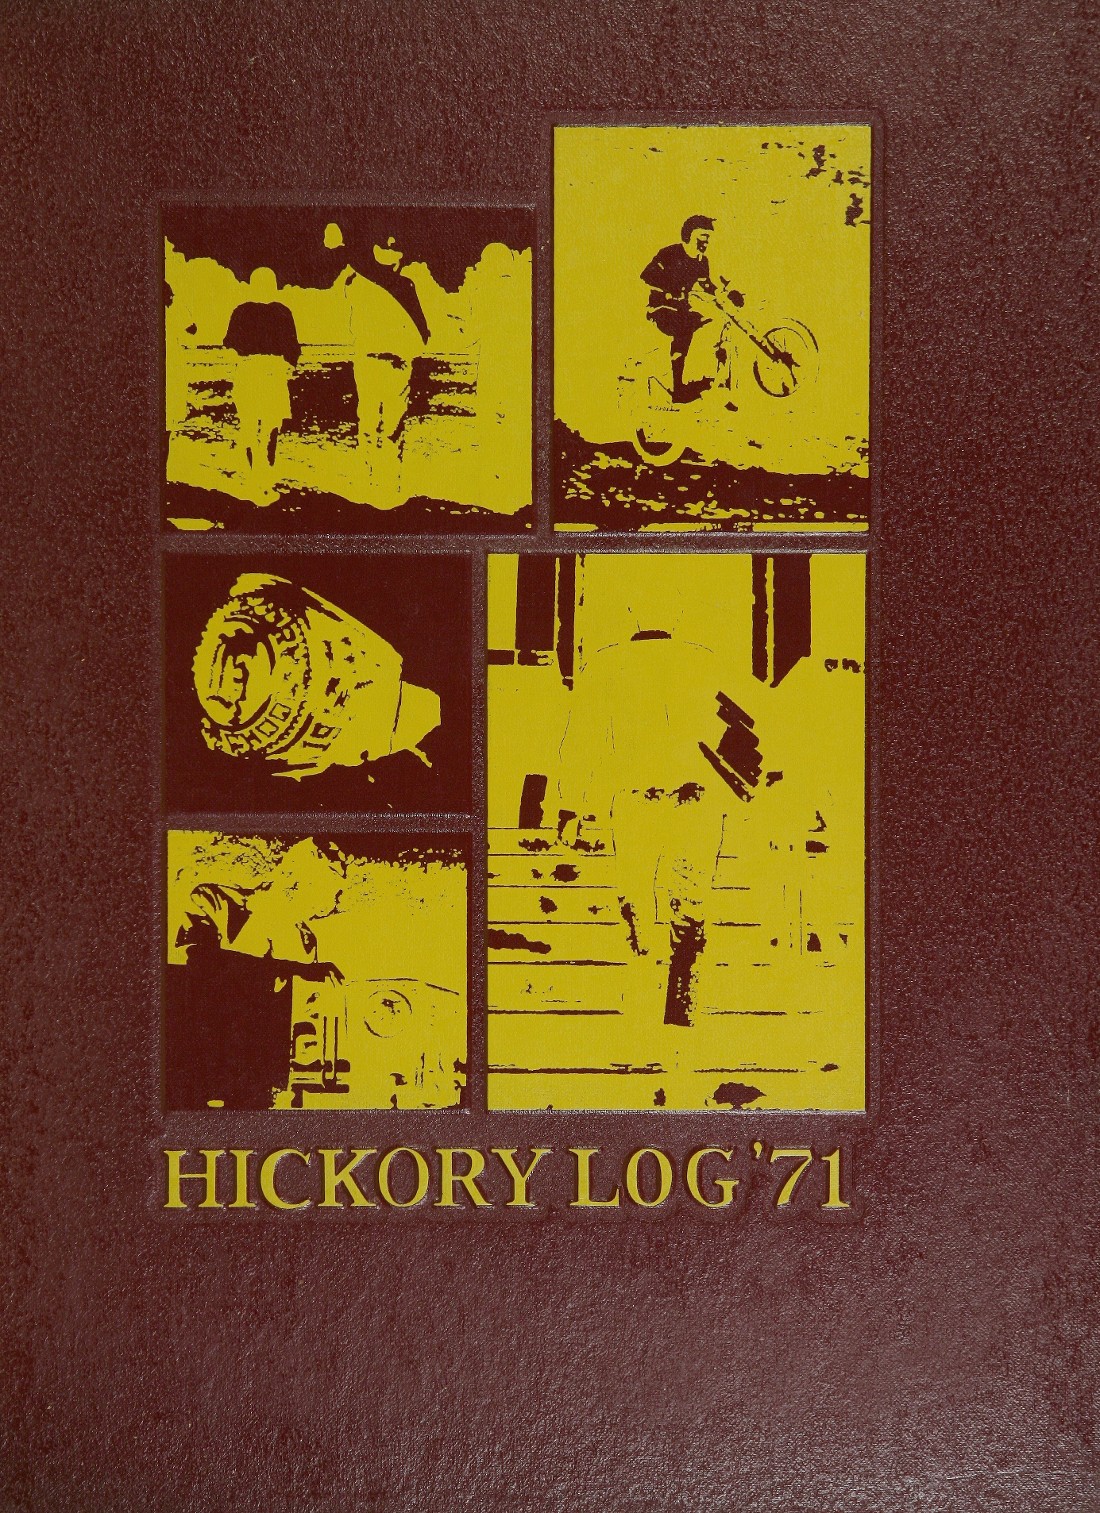 1971 yearbook from Hickory High School from Hickory, North Carolina for